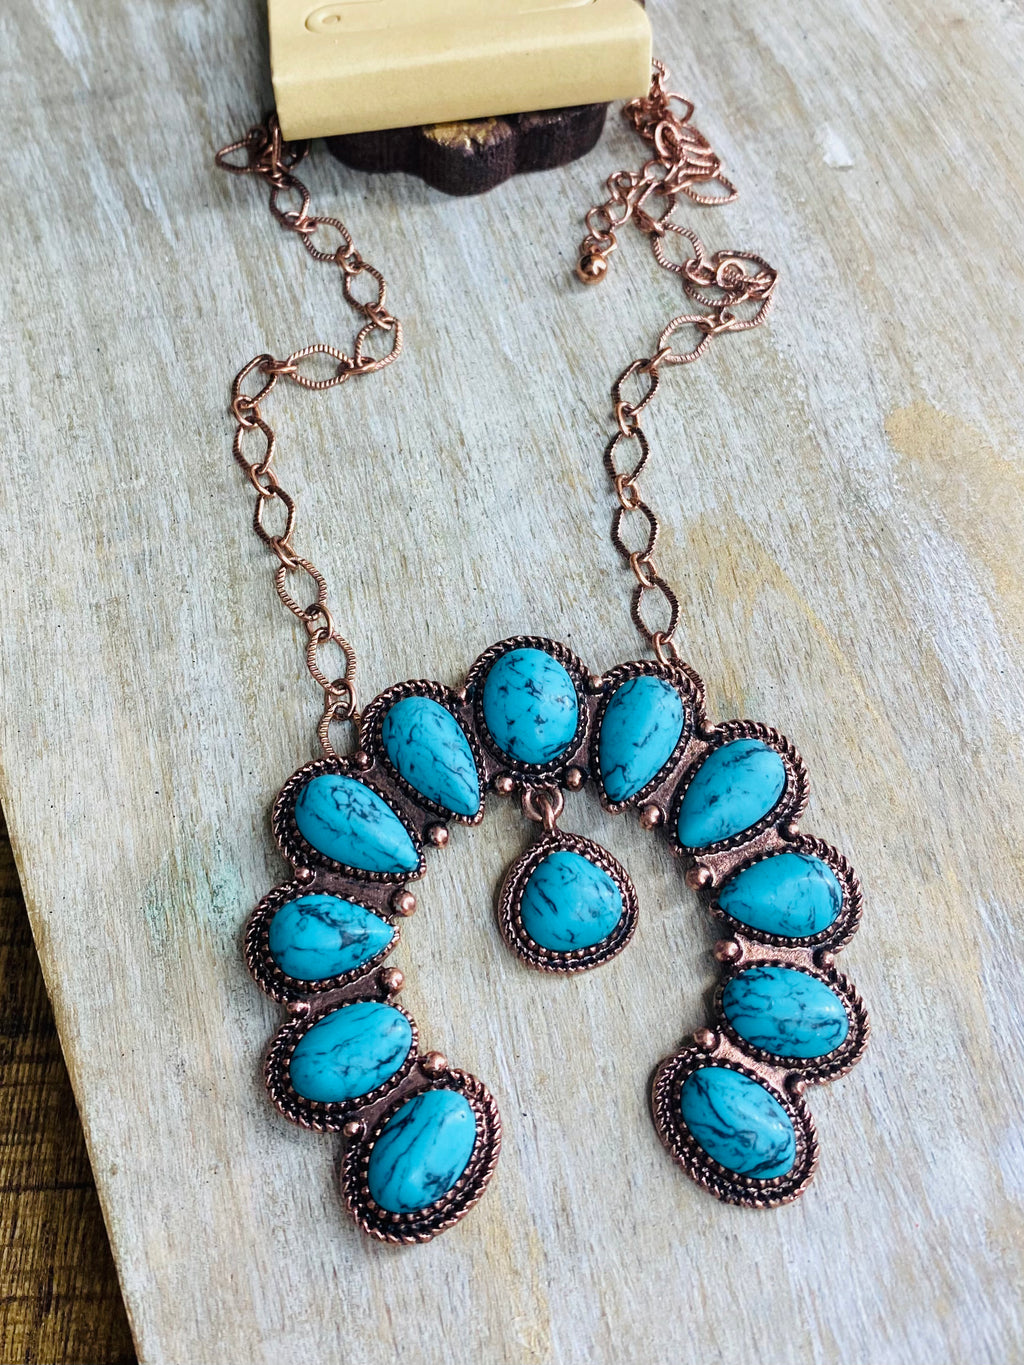 Turquoise Squash Blossom Chain Necklace